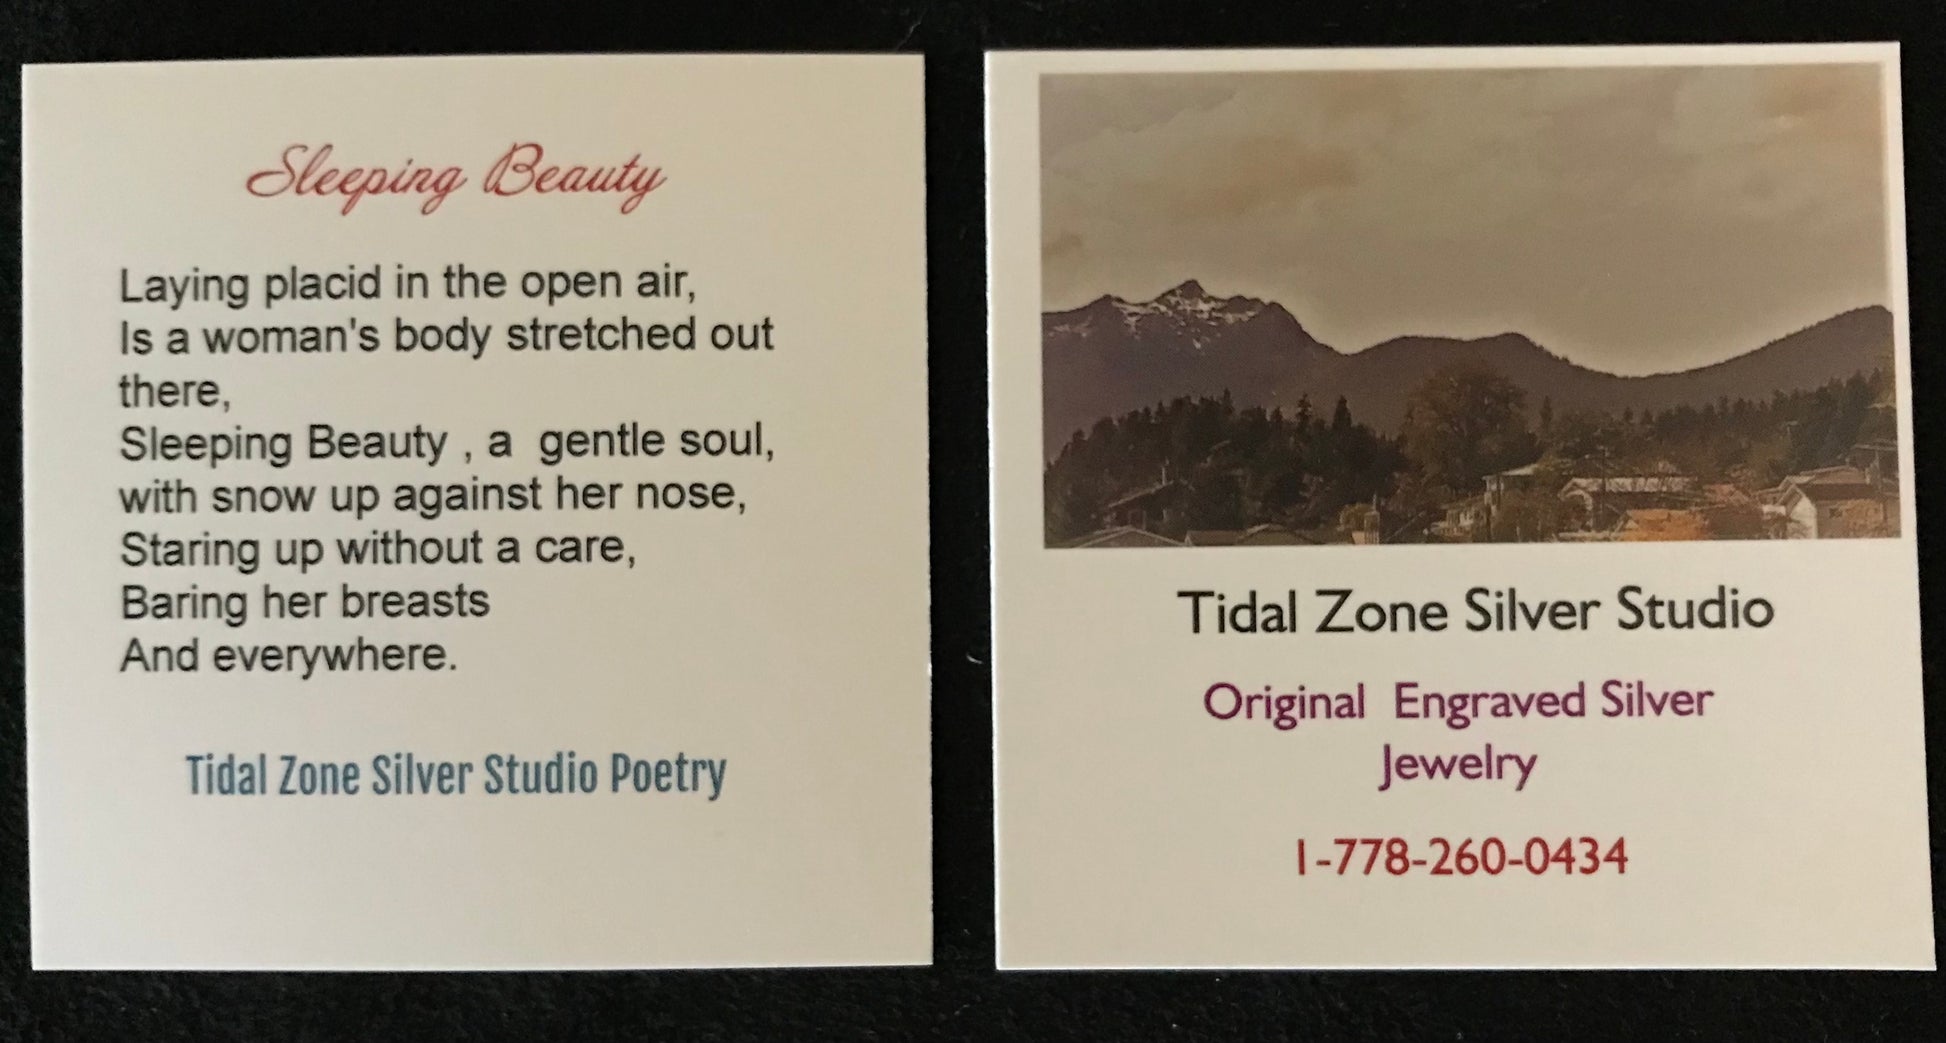 Sleeping Beauty Poetry on business card